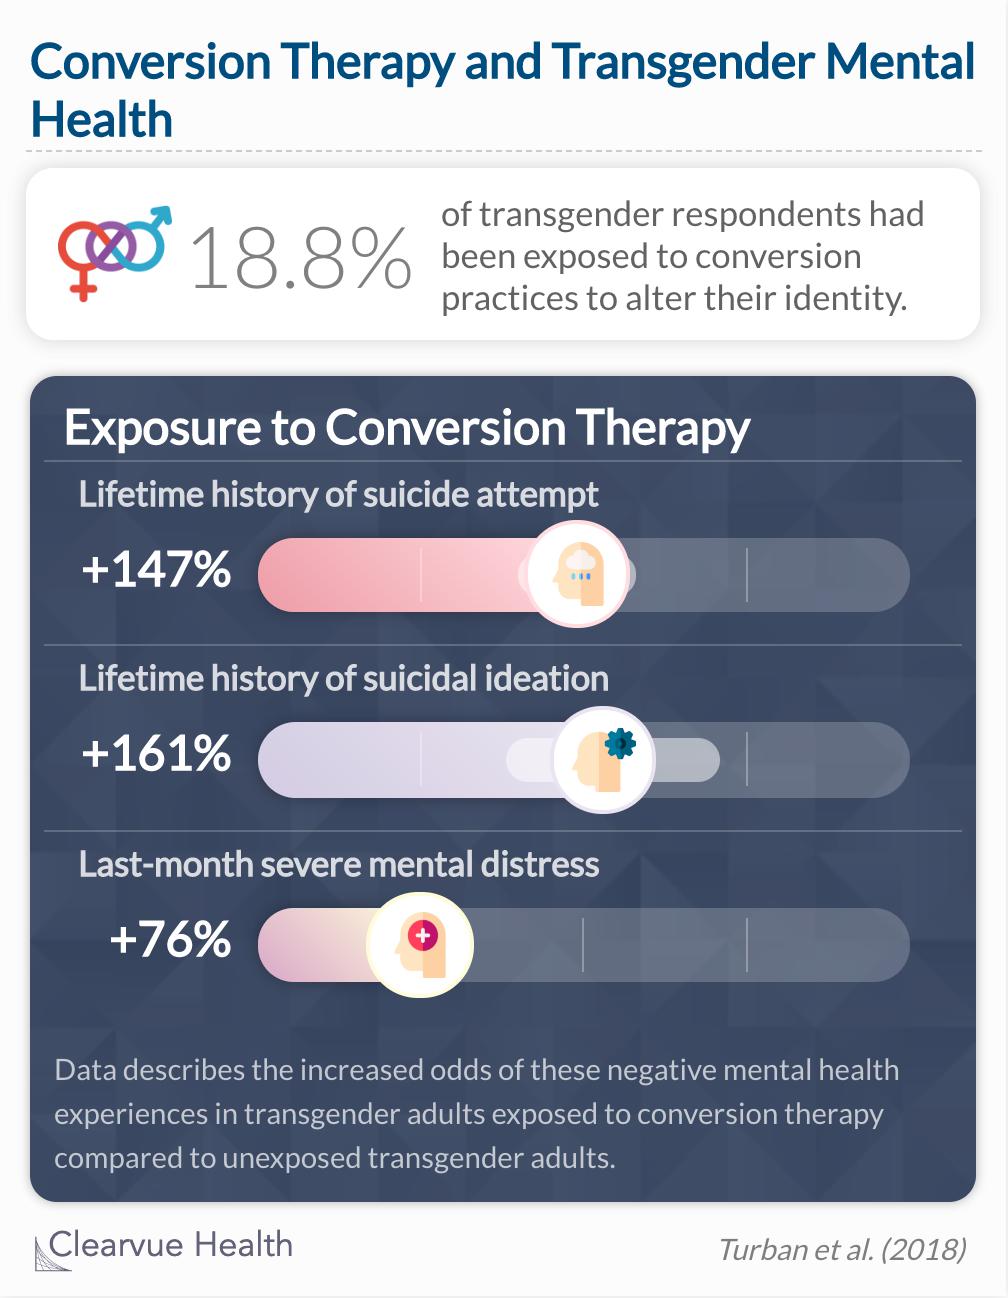 Transgender adults are more likely to experience negative mental health problems if exposed to conversion therapy. 